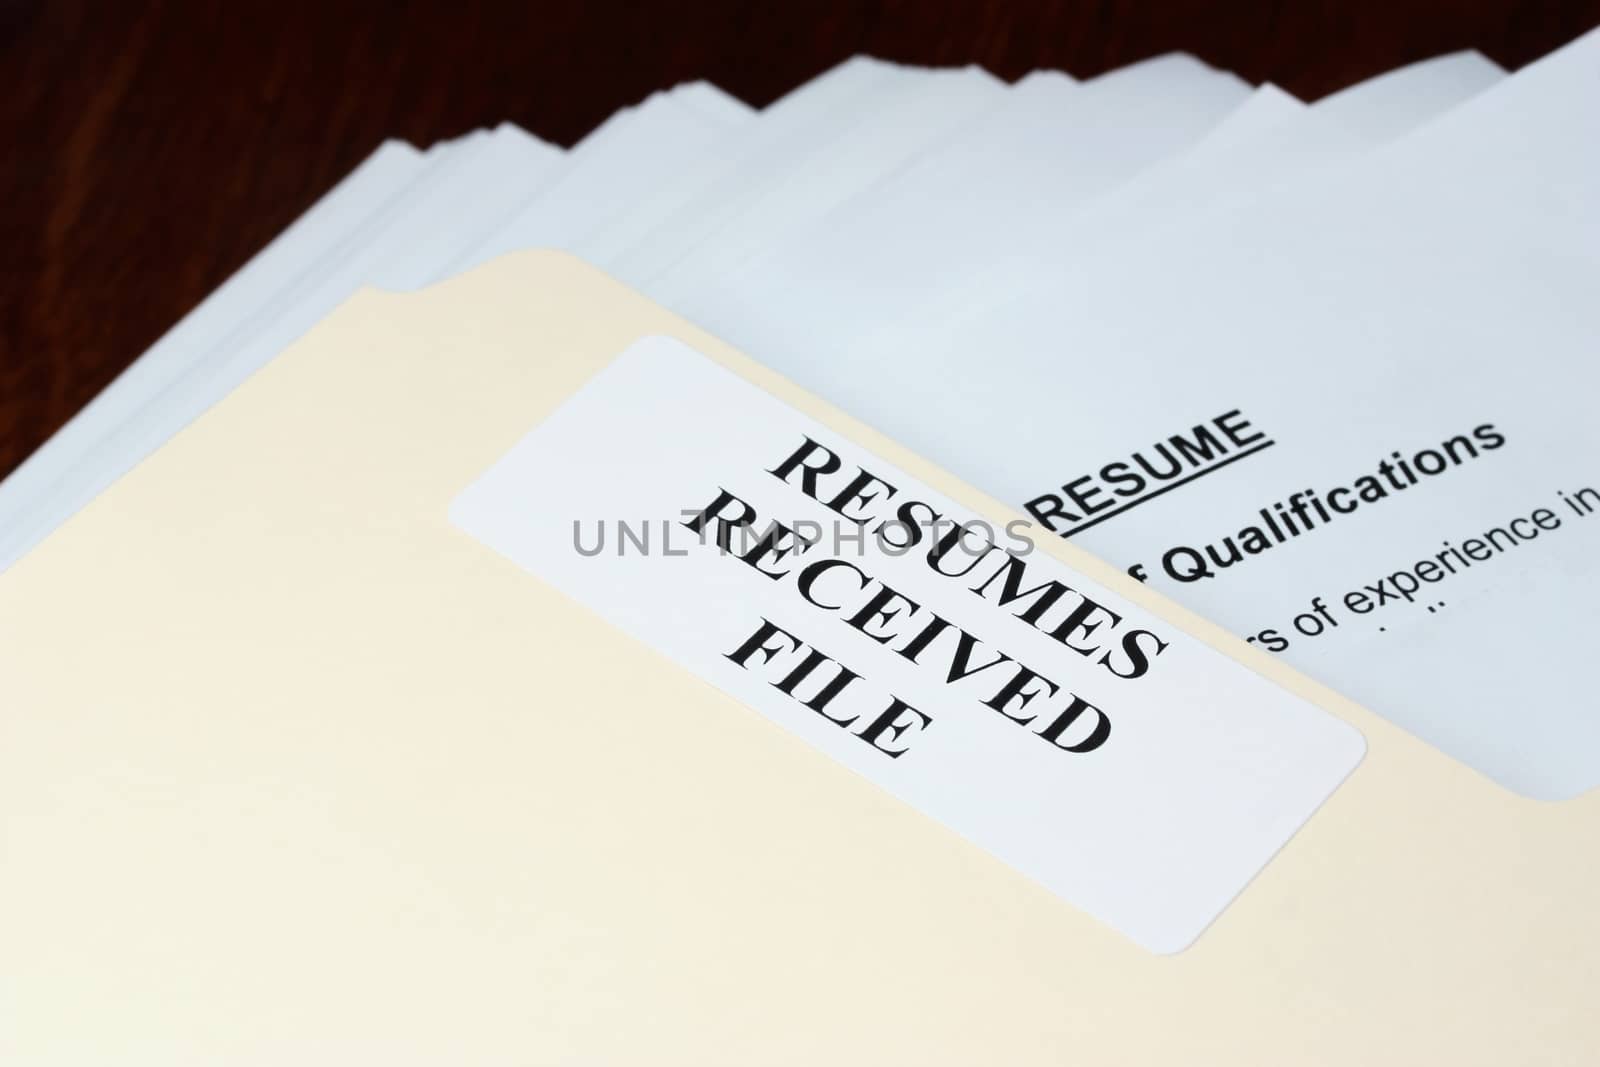 File with stack of resumes received